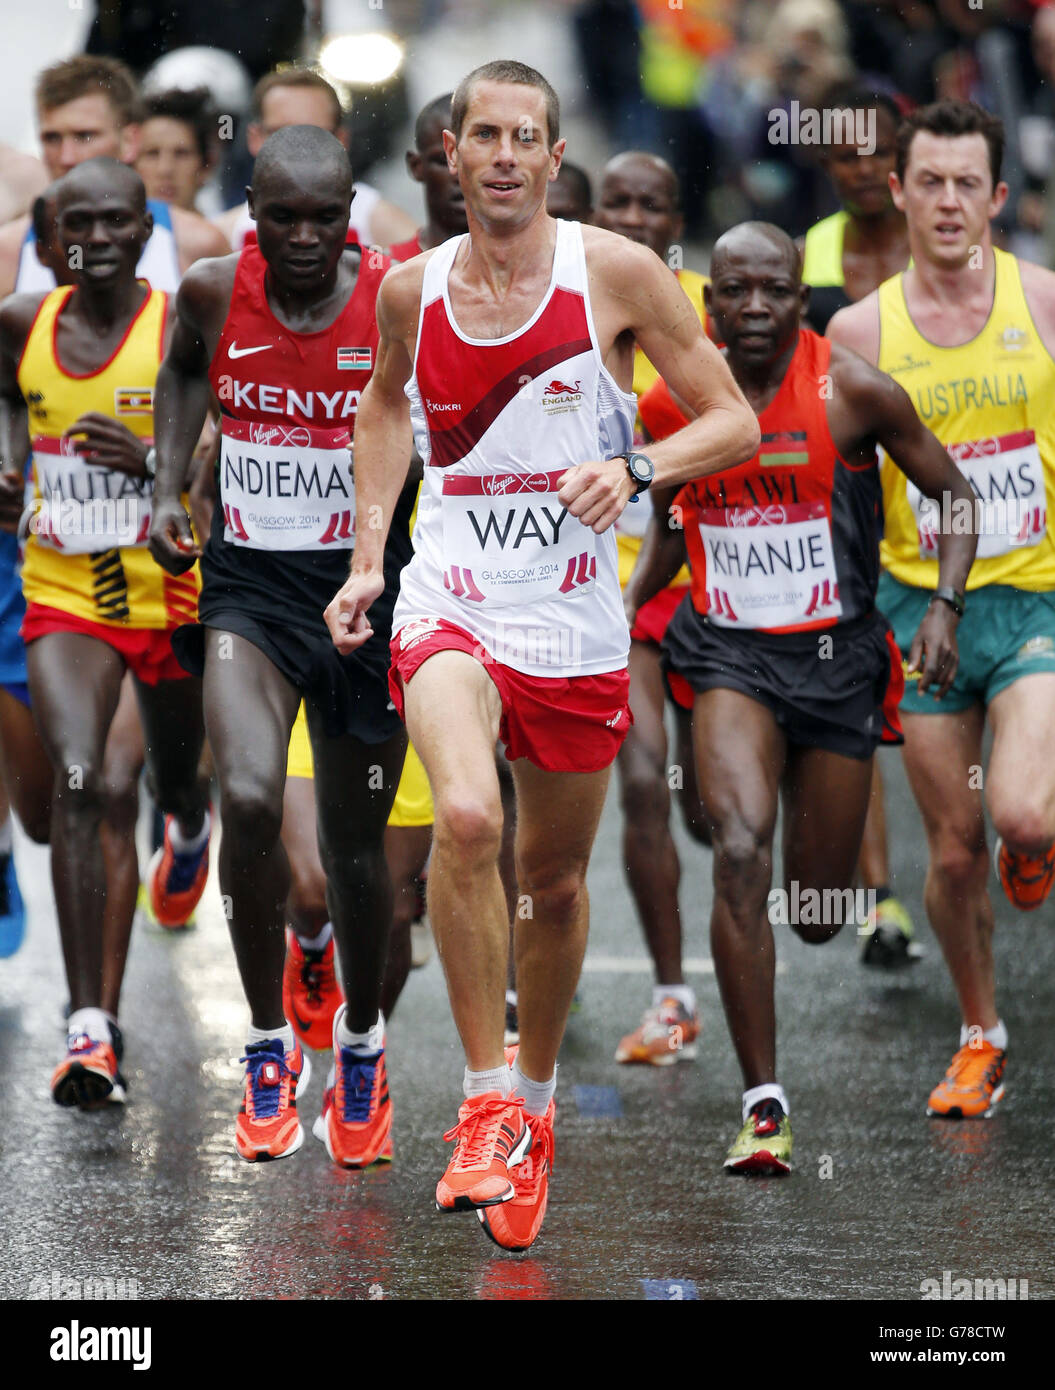 England's Steven Way in action during the Men's Marathon during the 2014 Commonwealth Games in Glasgow during the 2014 Commonwealth Games in Glasgow. Stock Photo